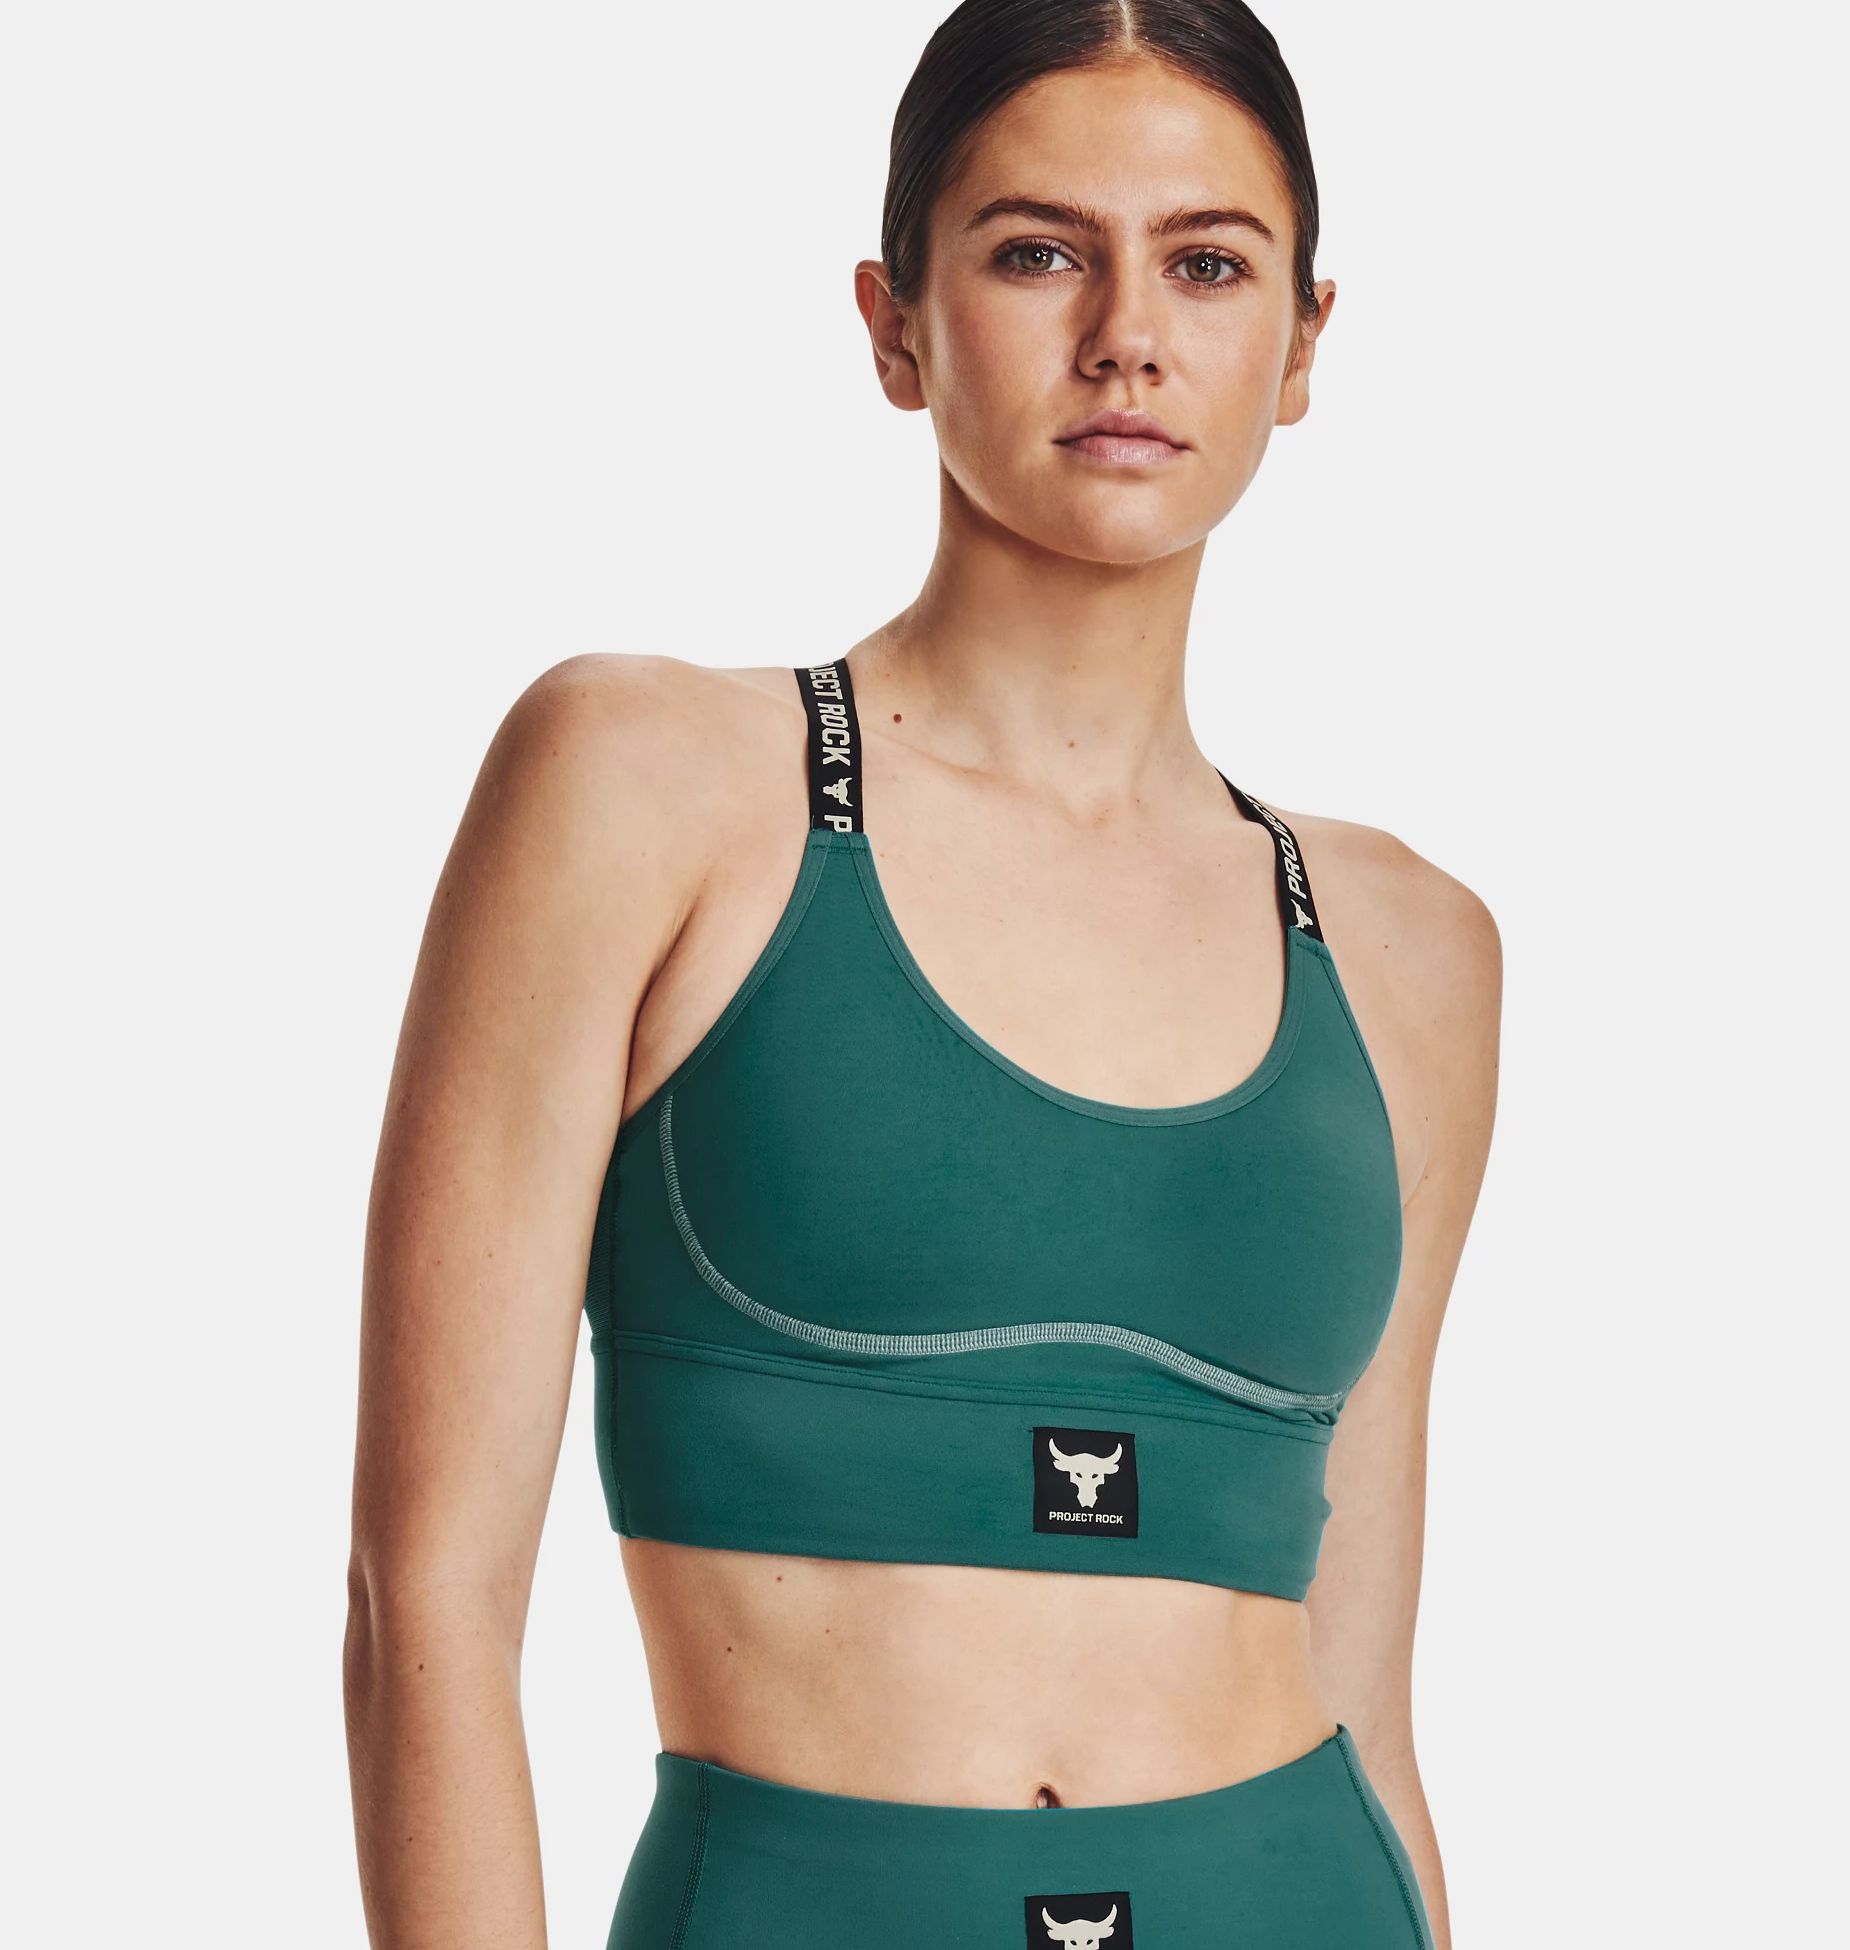 Under Armour Womens Infinity Harness High Impact Sports Bra